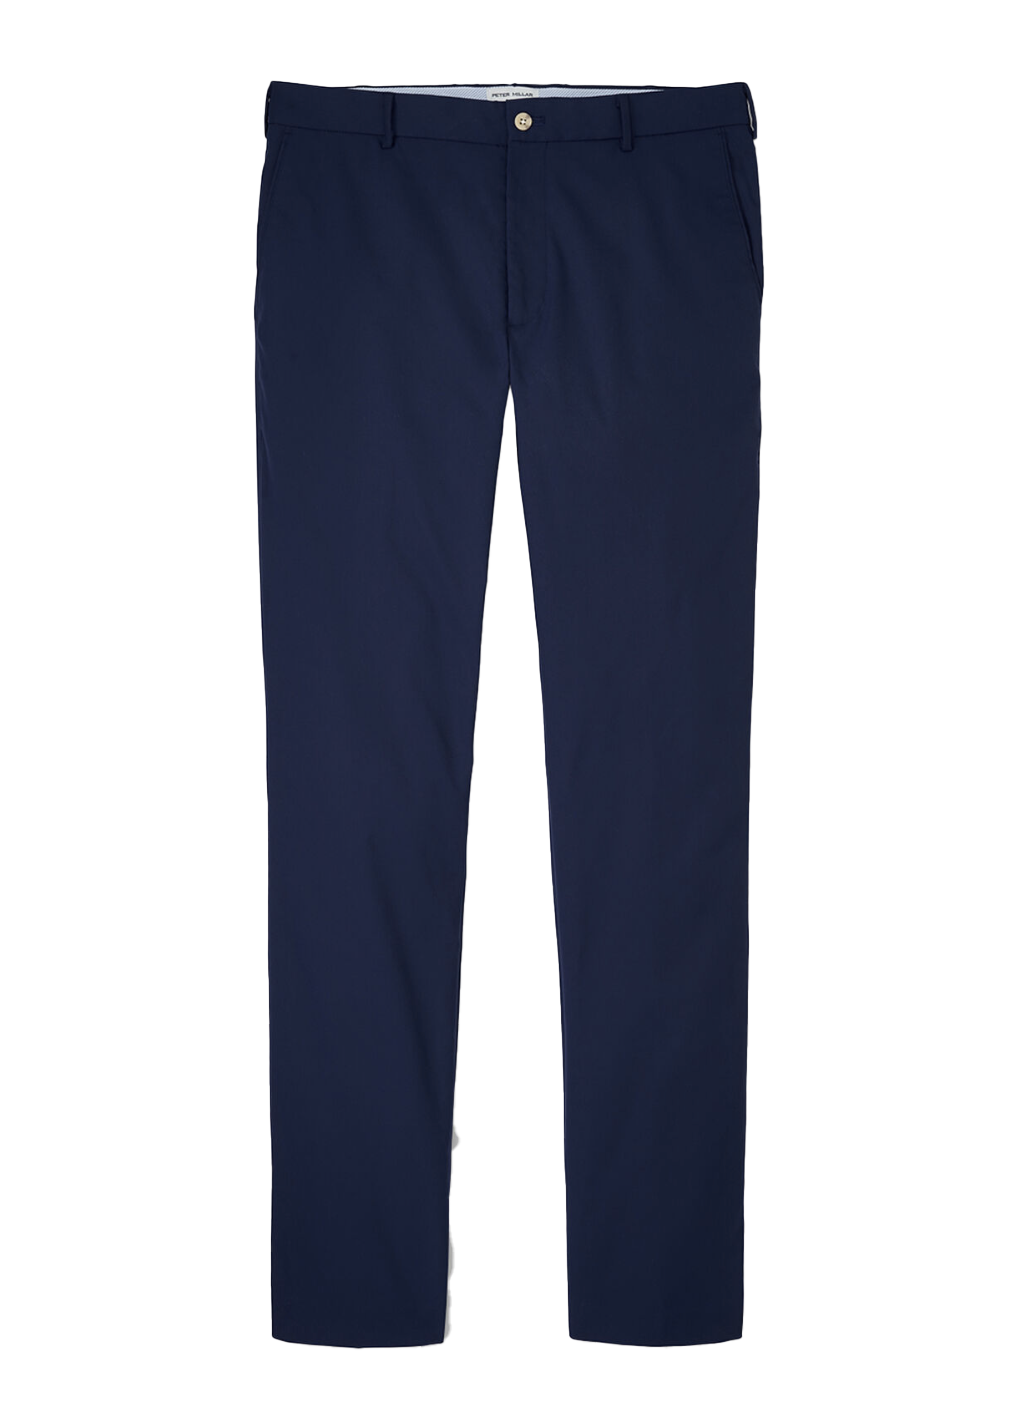 Raleigh Performance Trouser Navy